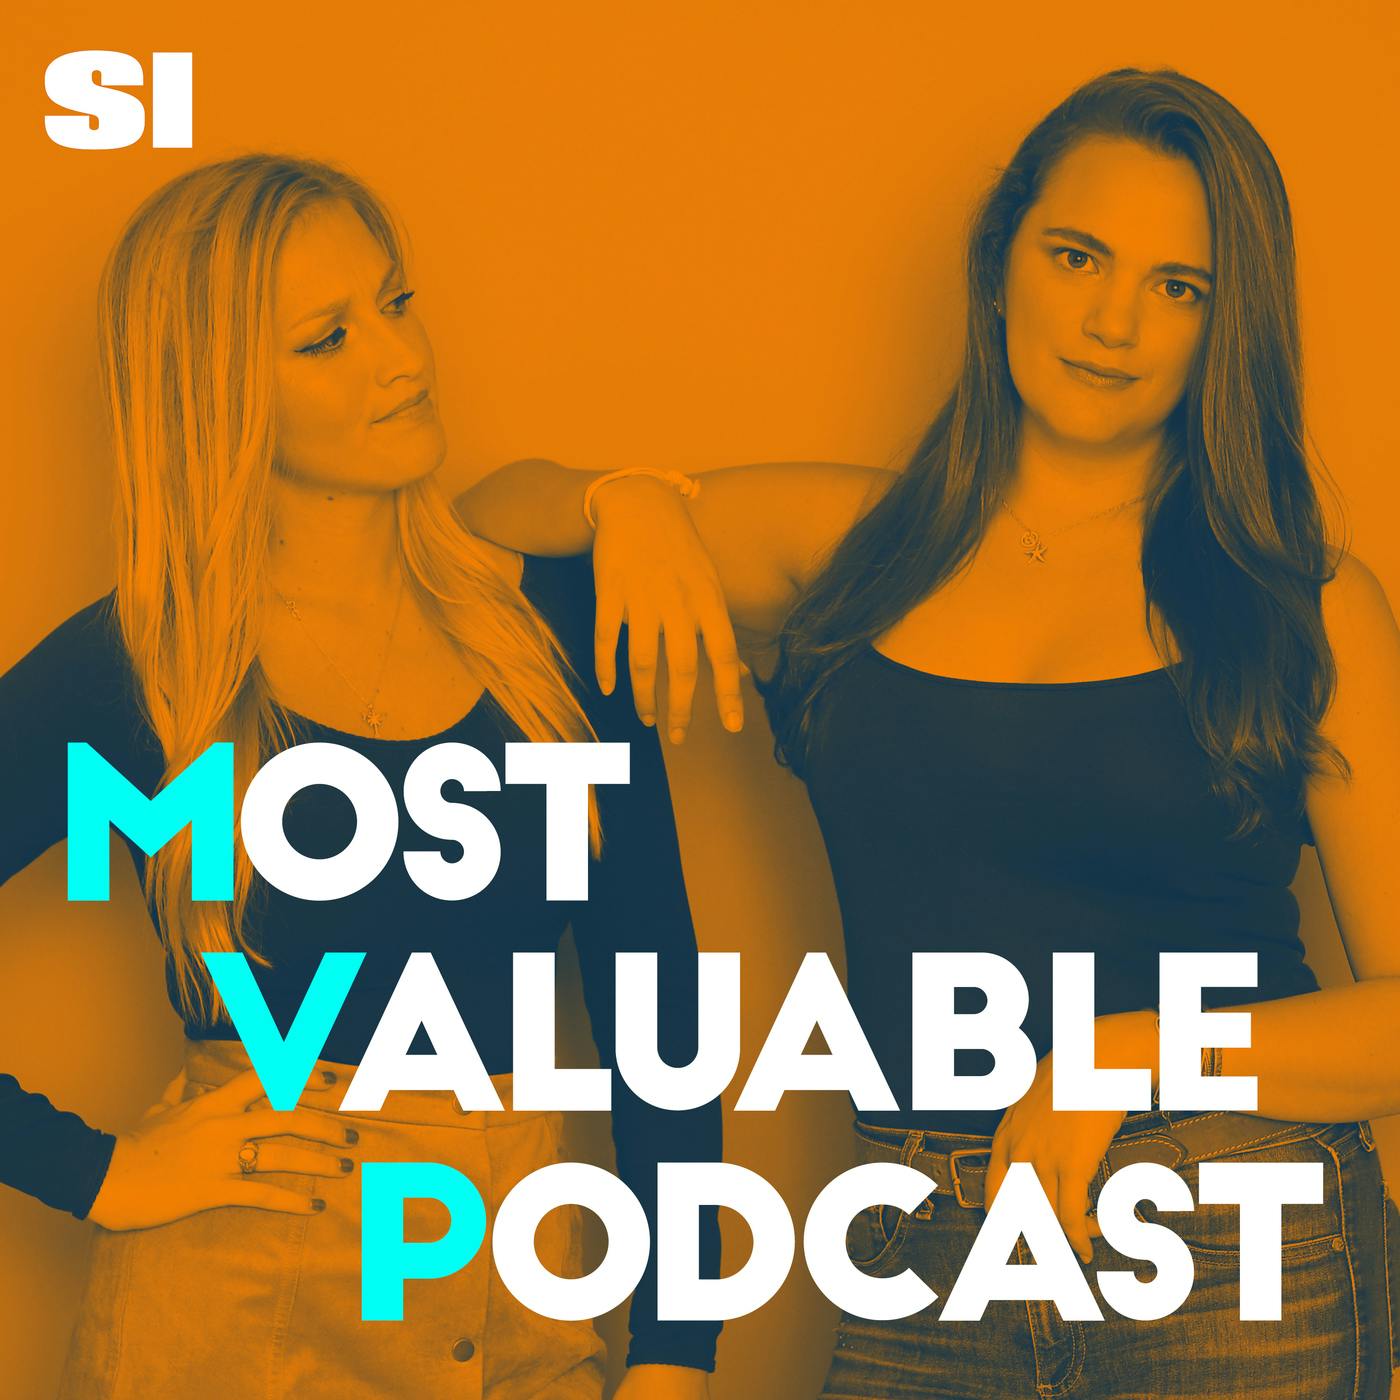 Most Valuable Podcast with Charlotte Wilder and Jess Smetana